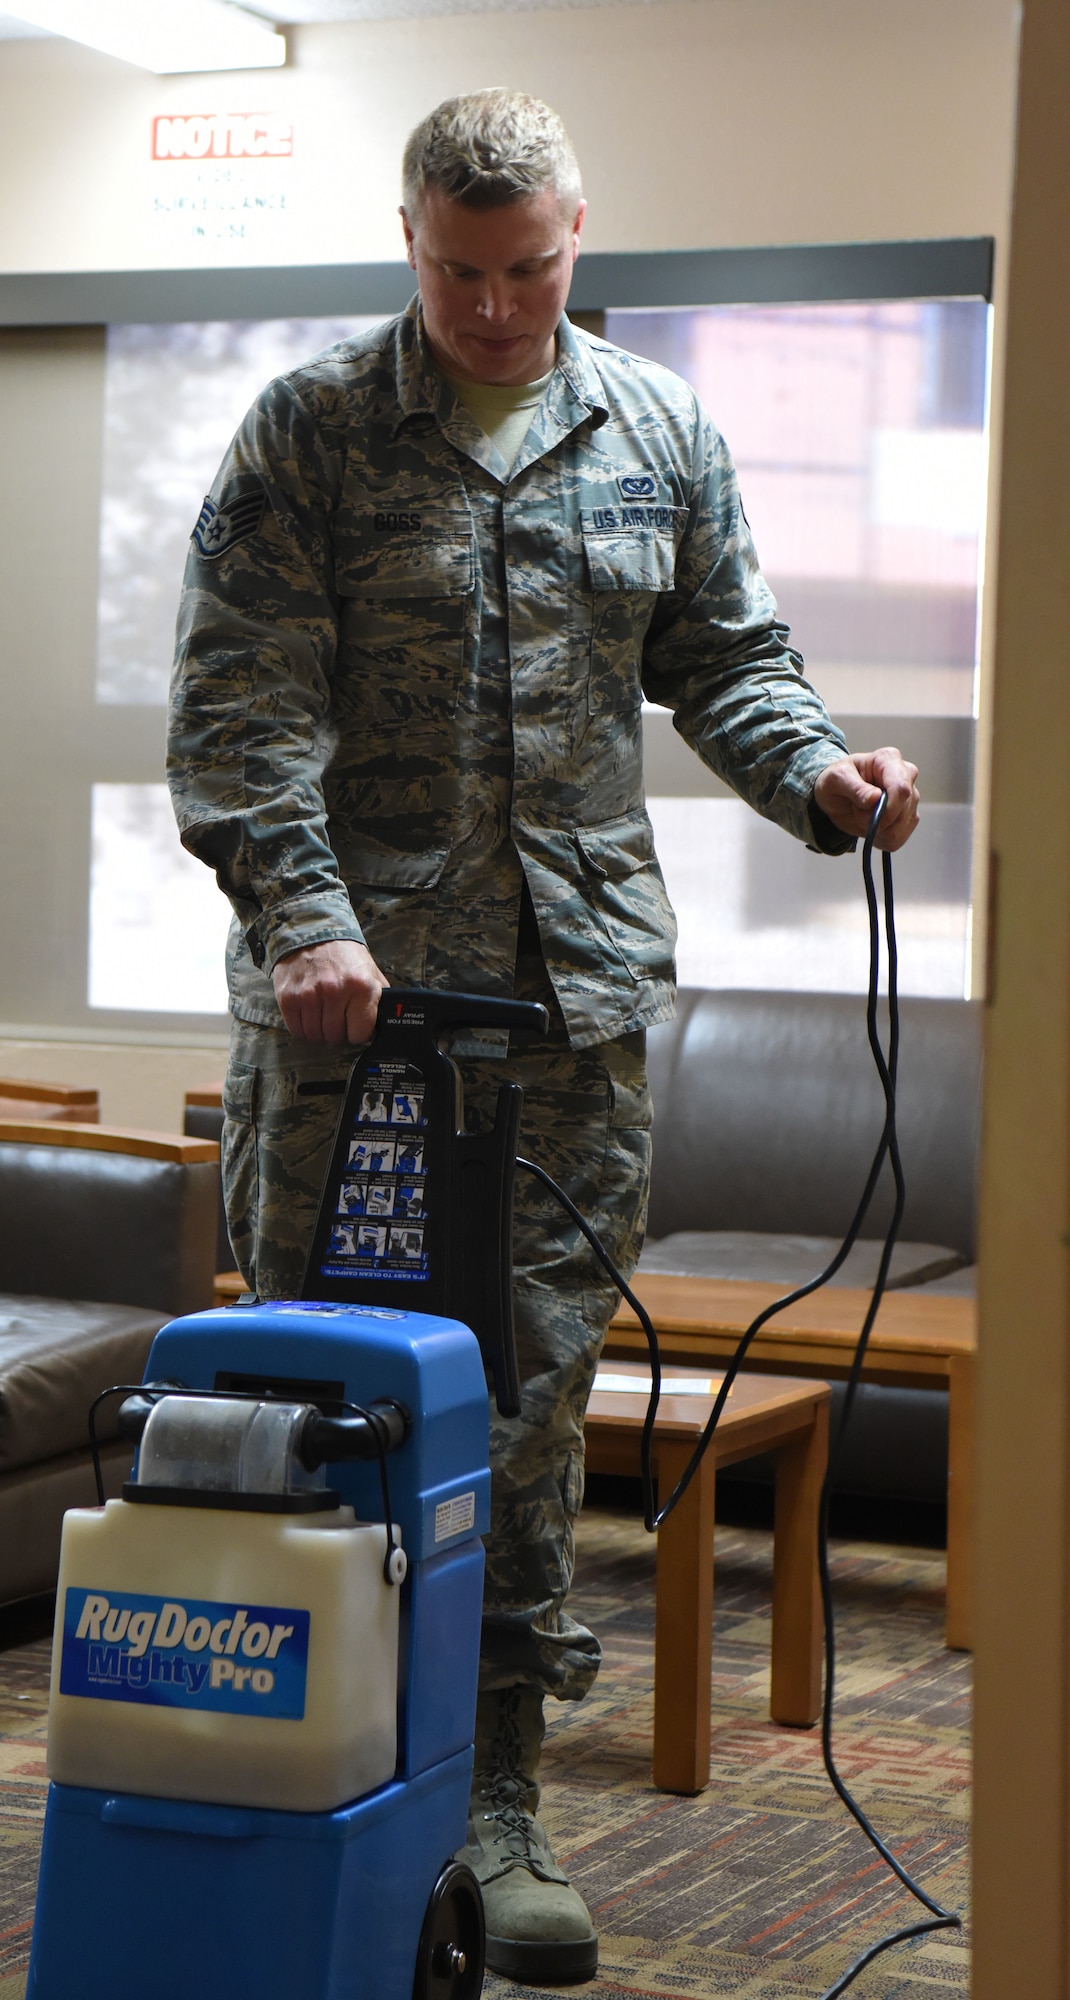 Staff Sgt. Jason Goss, an Airman dorm leader, uses a rug cleaner at Ellsworth Air Force Base, S.D., July 16, 2018. Dorm leaders ensure all six base dorms are maintained and kept in working order. (U.S. Air Force photo by Airman 1st Class Thomas Karol)